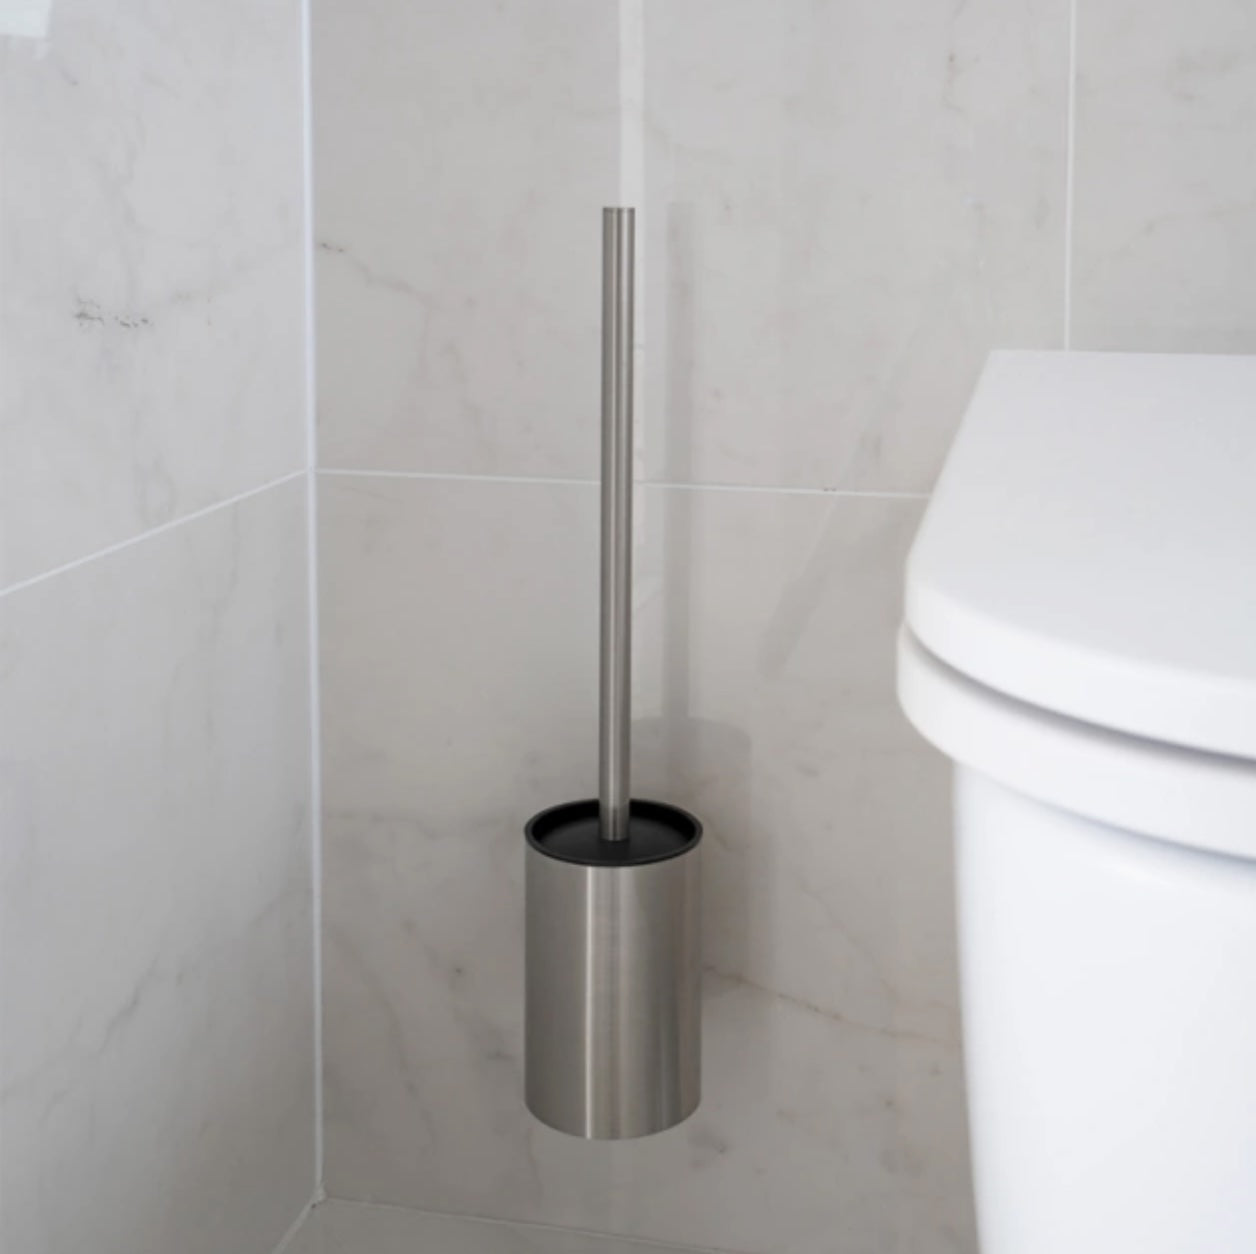 Toilet brush - Brushed stainless look